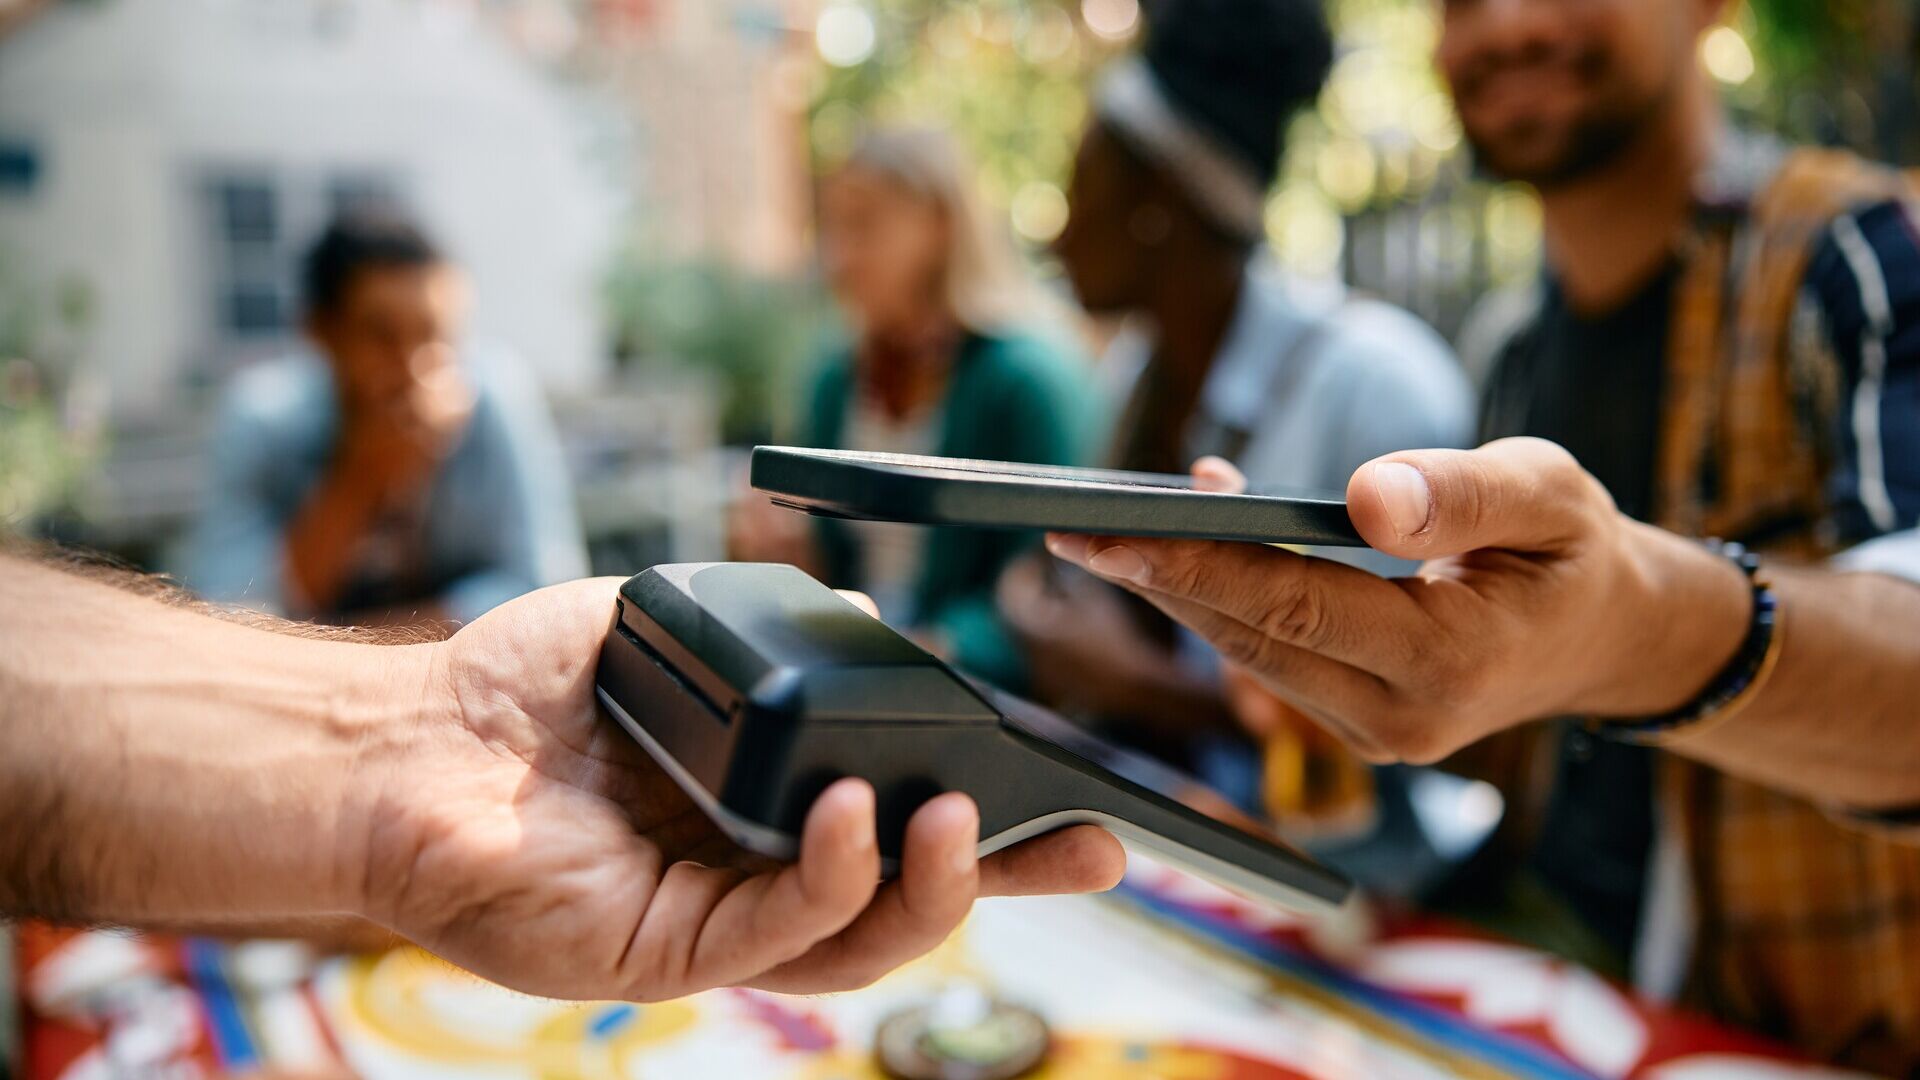 Mobile payments: Compared to countries like China or the USA, the infrastructure for mobile payments is not sufficiently developed in the Federal Republic of Germany